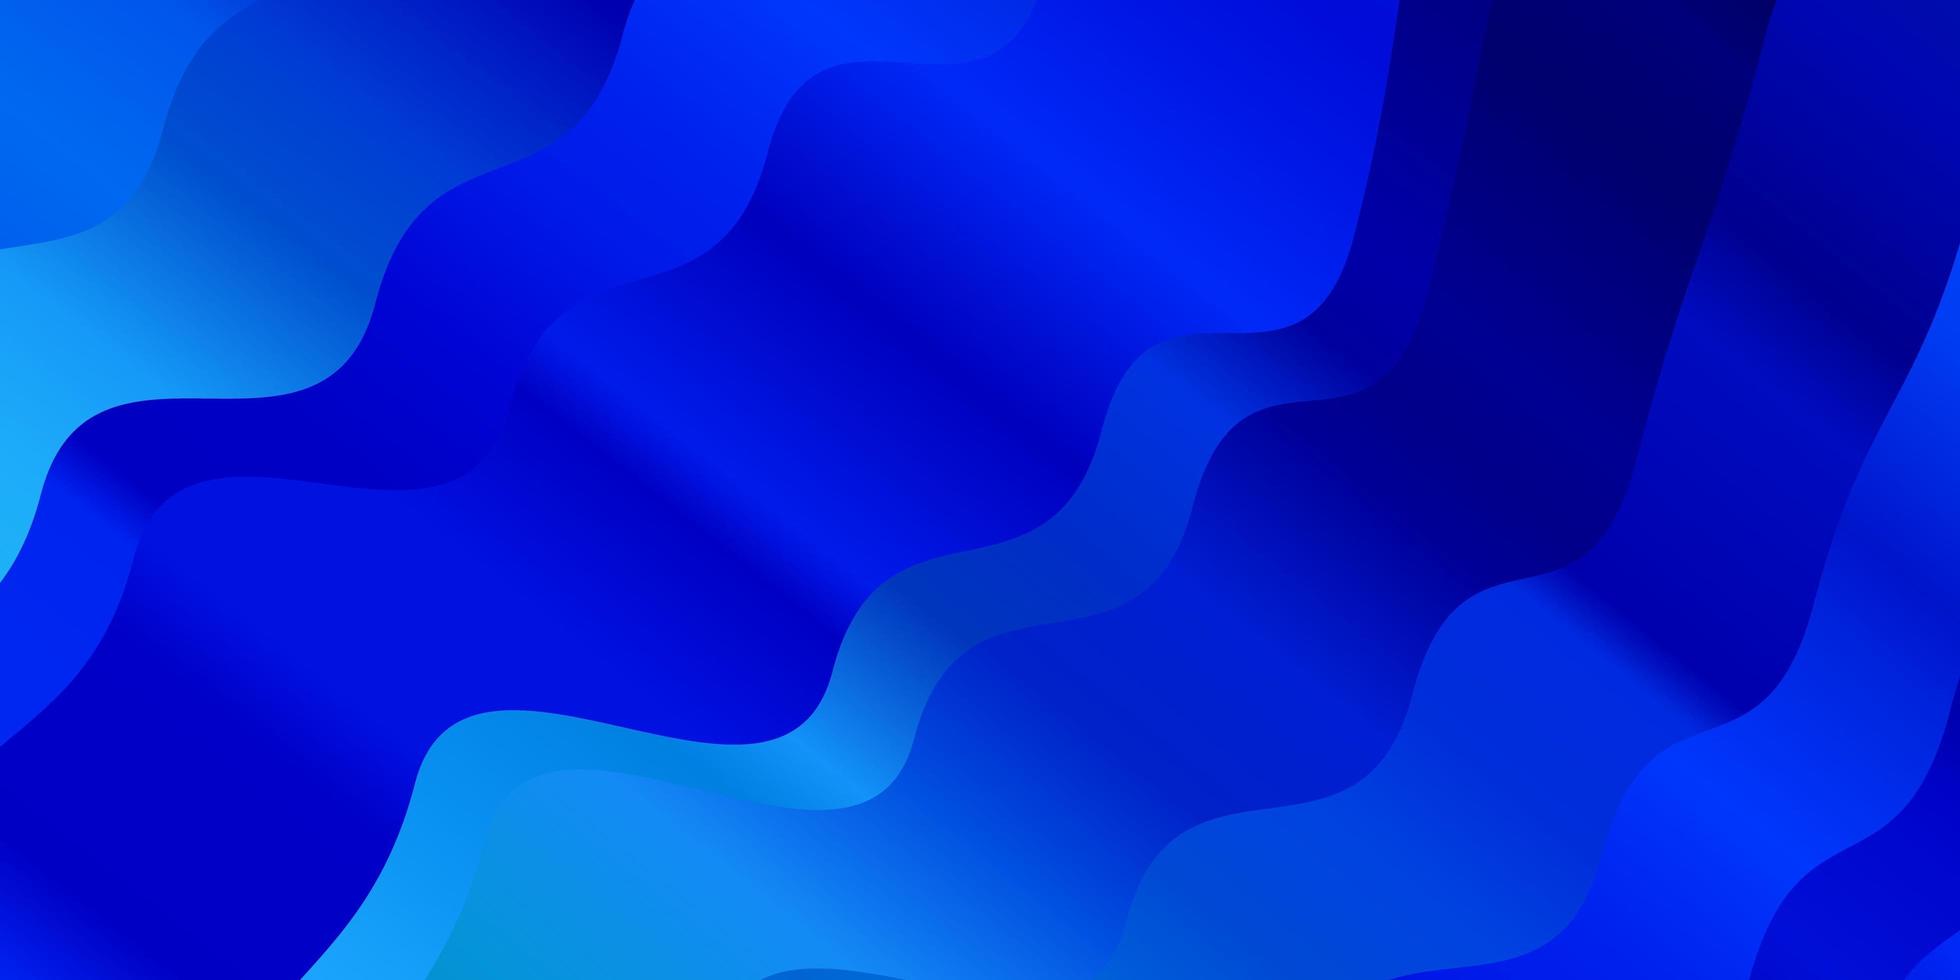 Blue pattern with wry lines. vector